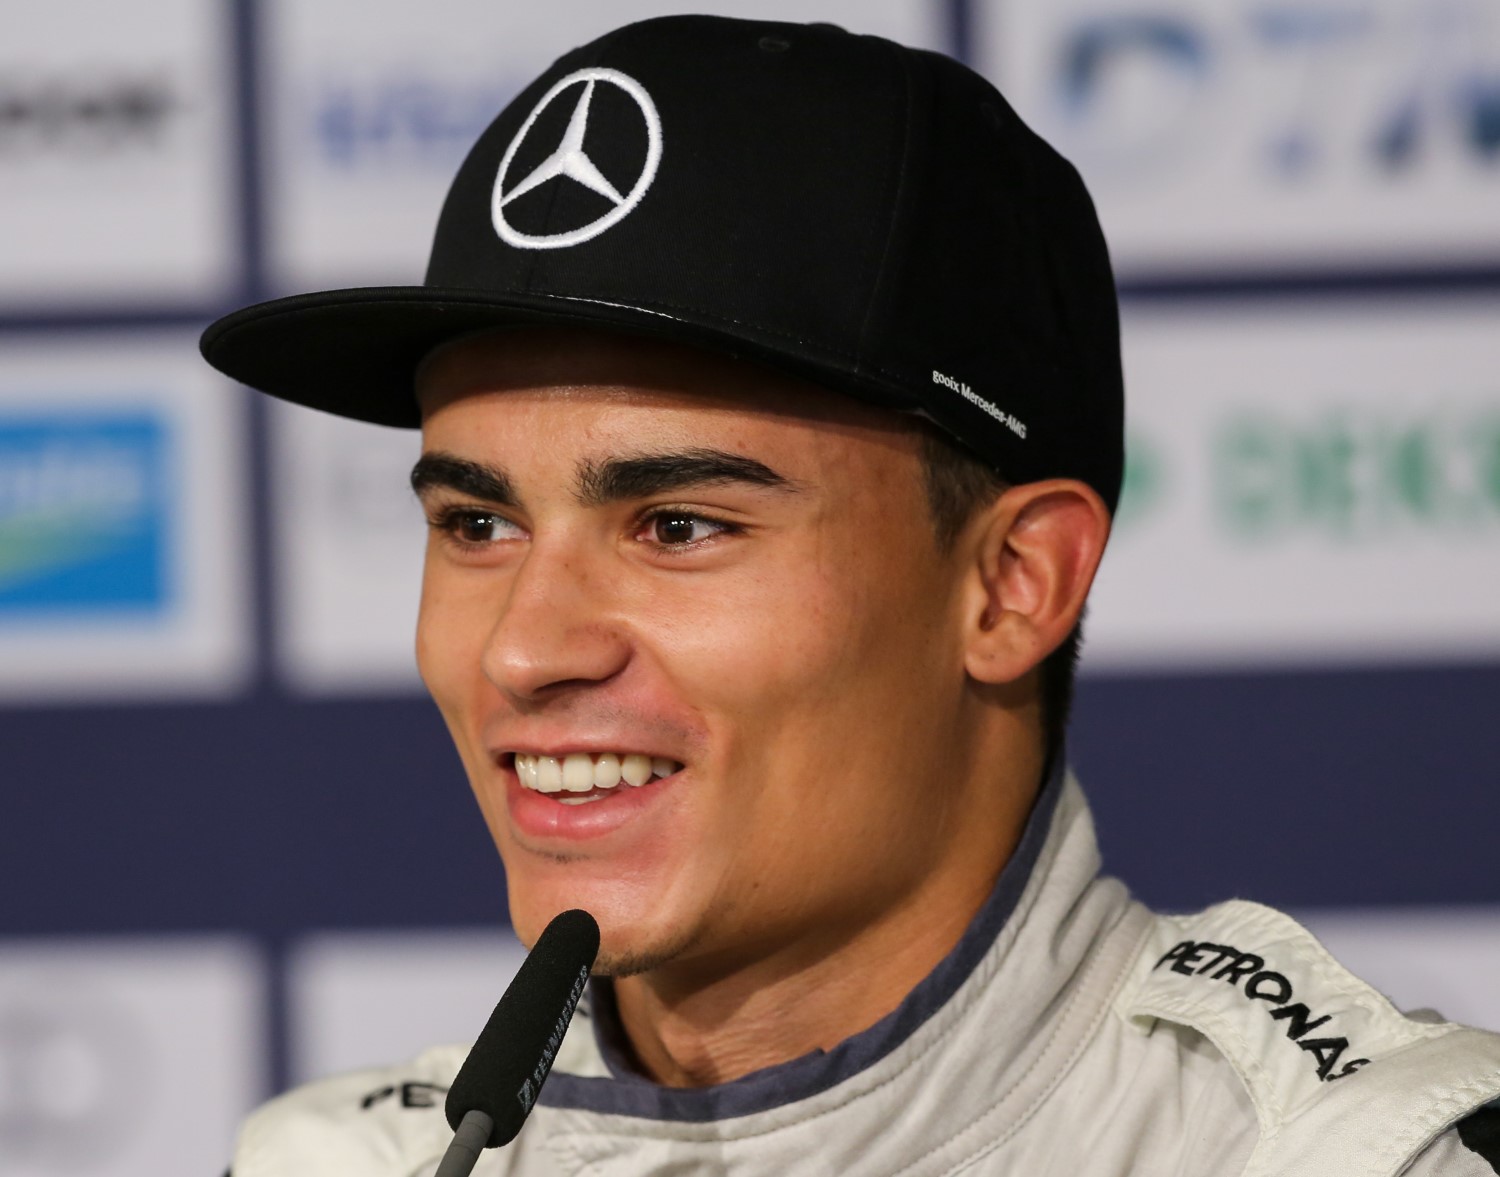 Pascal Wehrlein back to DTM